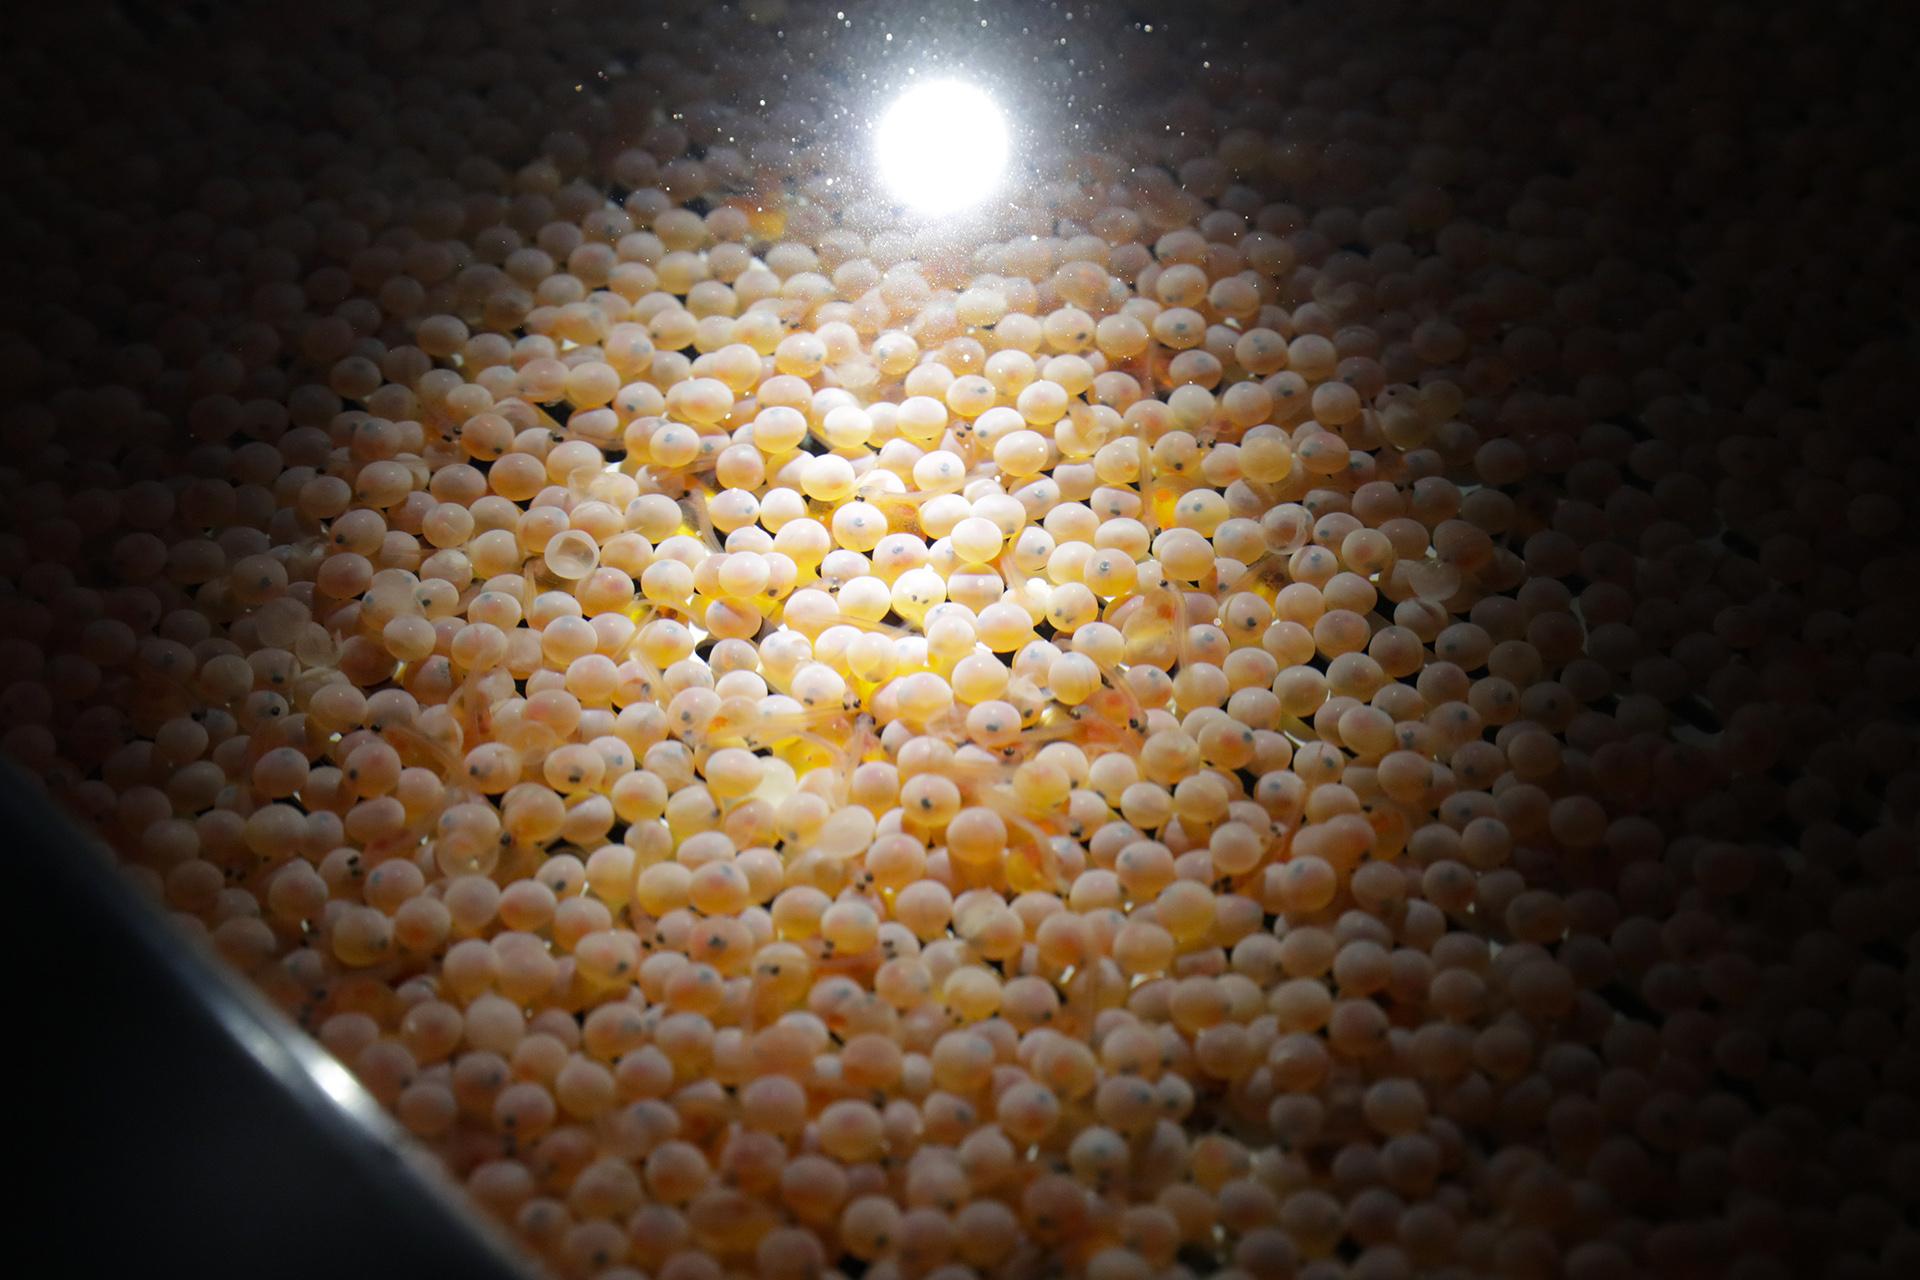 The first batch of bioengineered Atlantic salmon eggs are shown in an incubation tray at AquaBounty Technologies' facility in Albany, Indiana on Wednesday, June 19, 2019. The company, which already breeds the salmon in Canada, is incubating this first batch of bioengineered eggs and the first salmon fillets raised there would be ready in late 2020. (AP Photo / Michael Conroy)